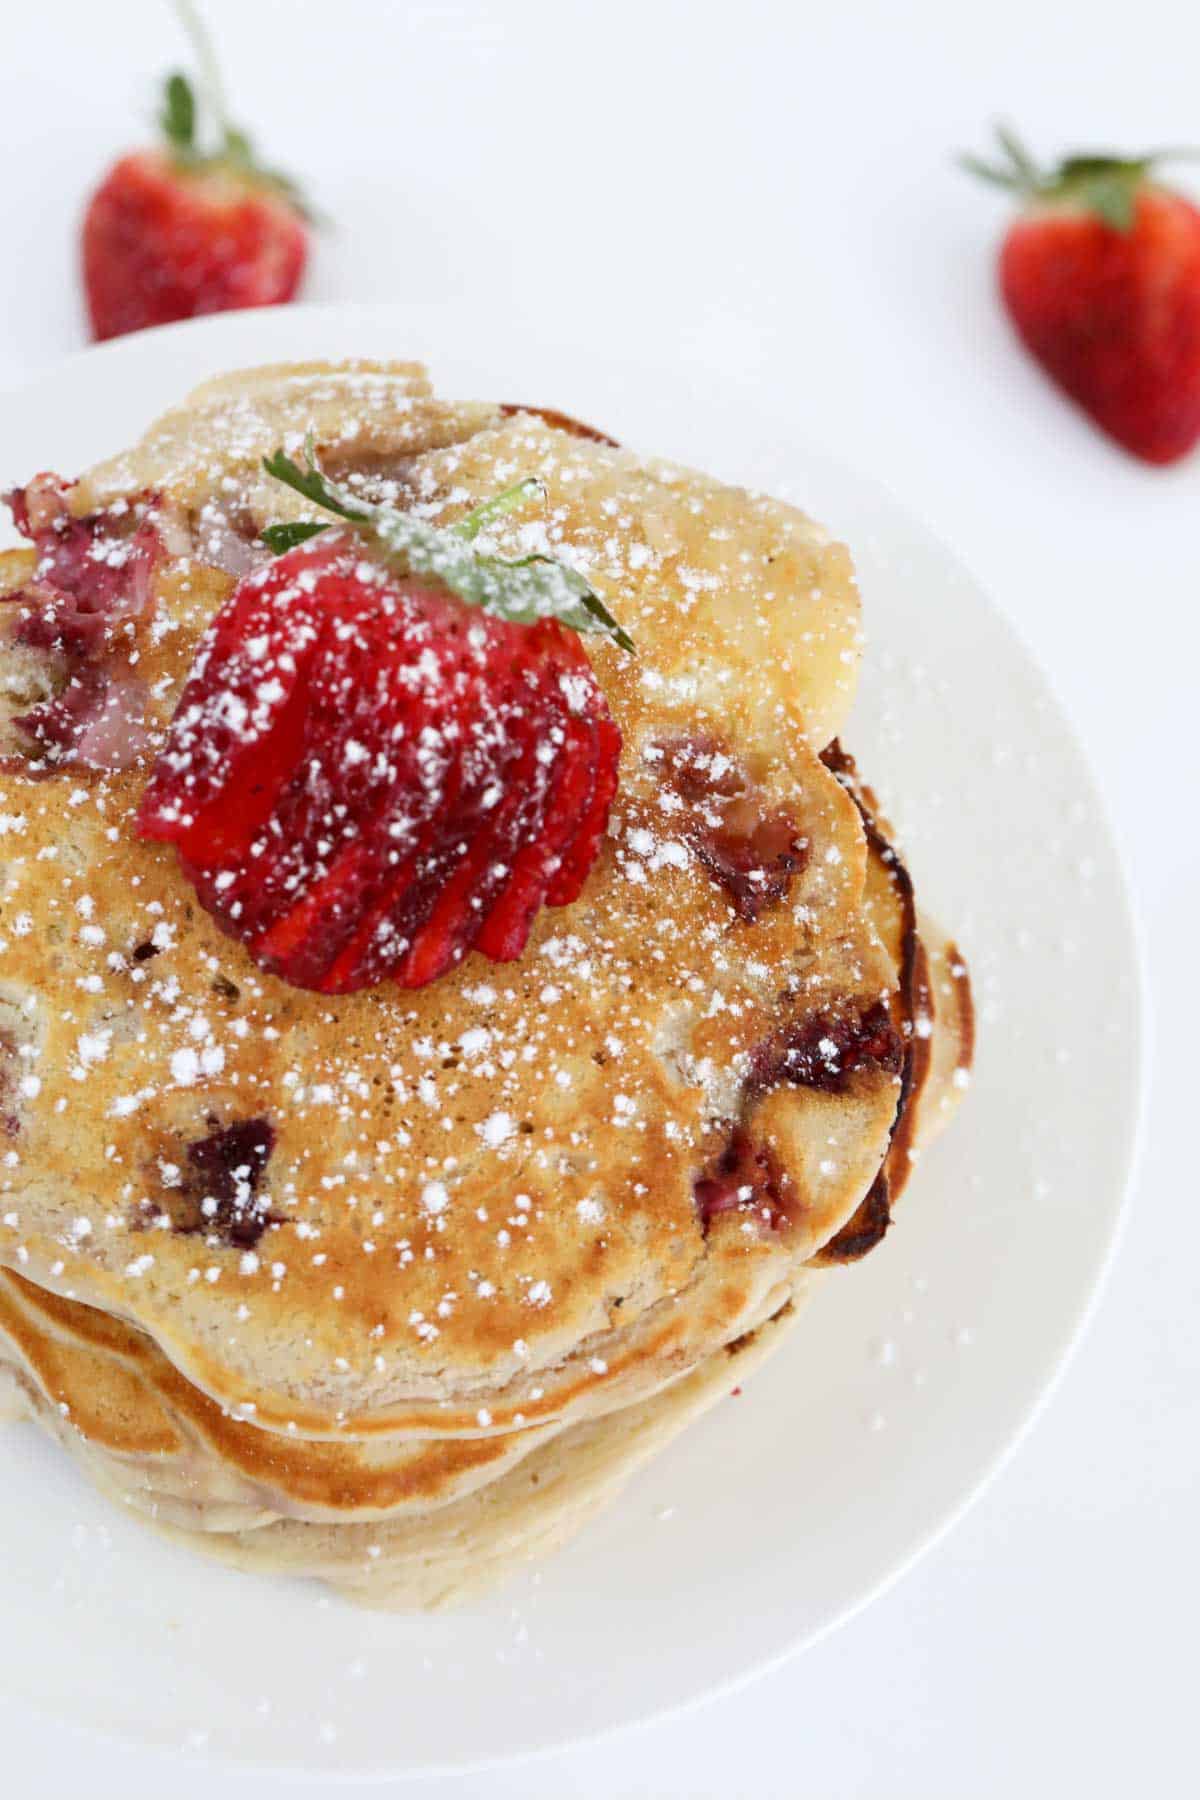 Looking down on a stack of pancakes with a sliced strawberry on top, dusted with icing sugar.